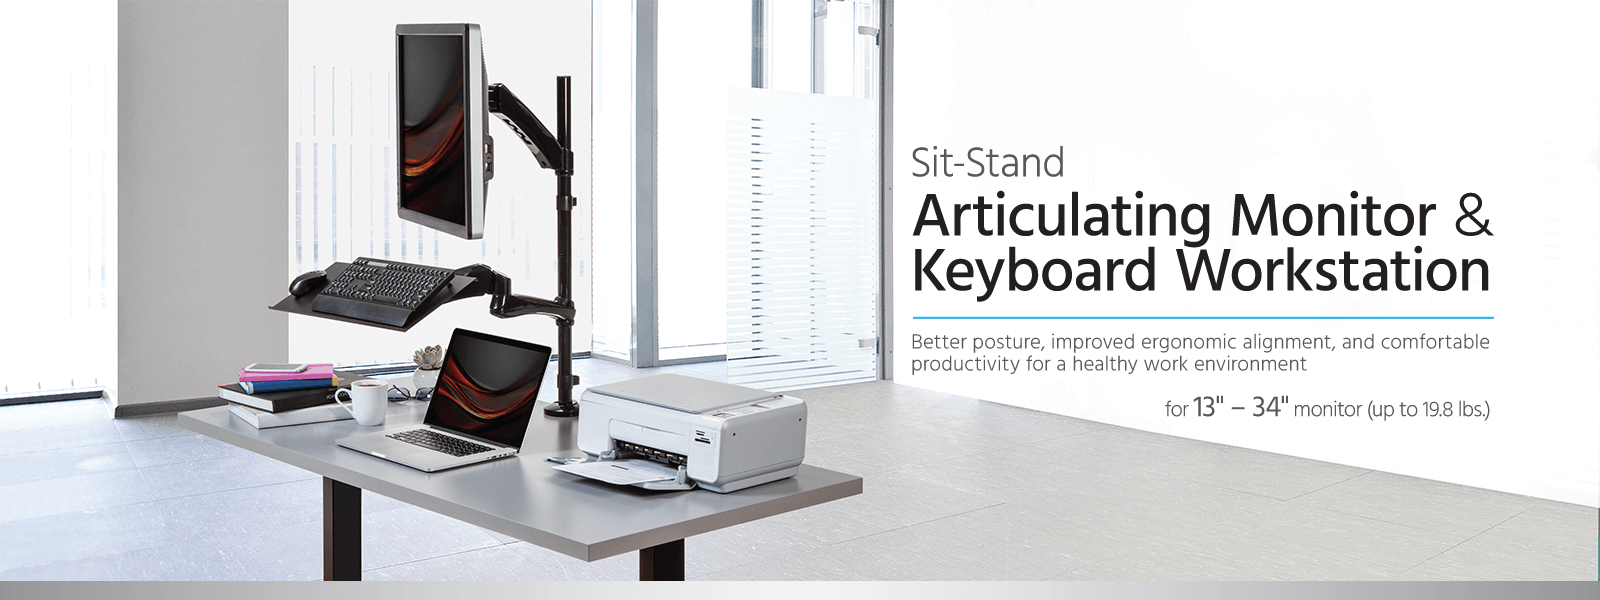 Sit-Stand Dual Monitor and Keyboard Workstation